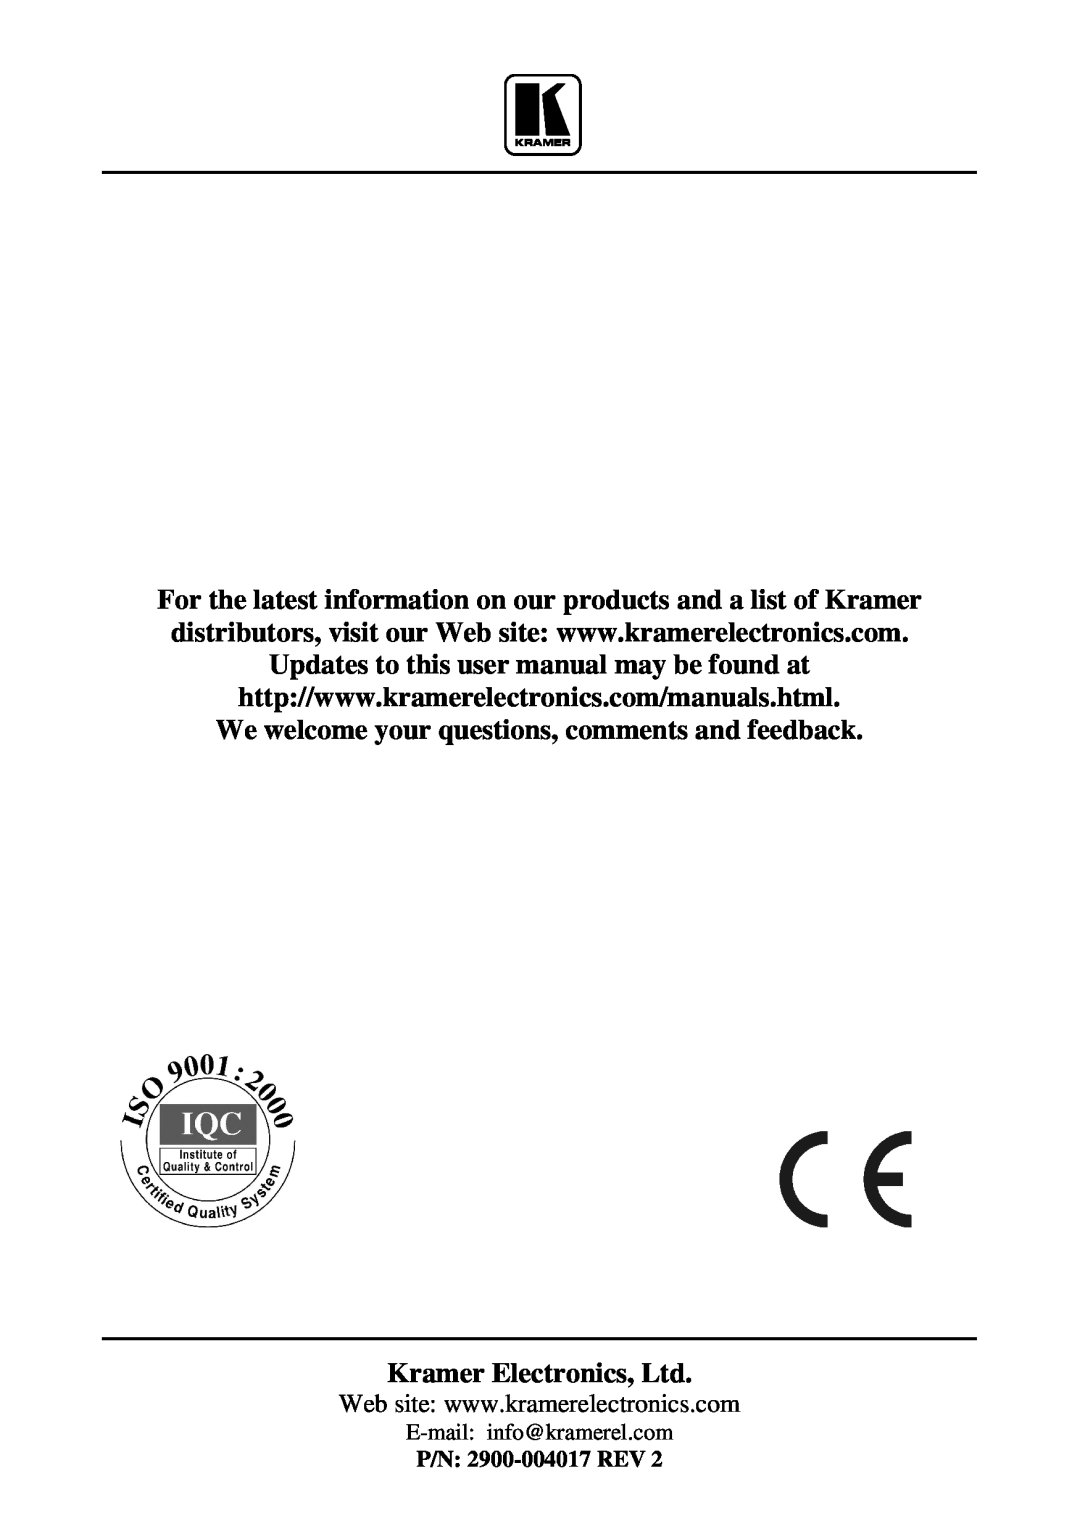 Kramer Electronics FC-14 Updates to this user manual may be found at, E-mail info@kramerel.com, P/N 2900-004017 REV 